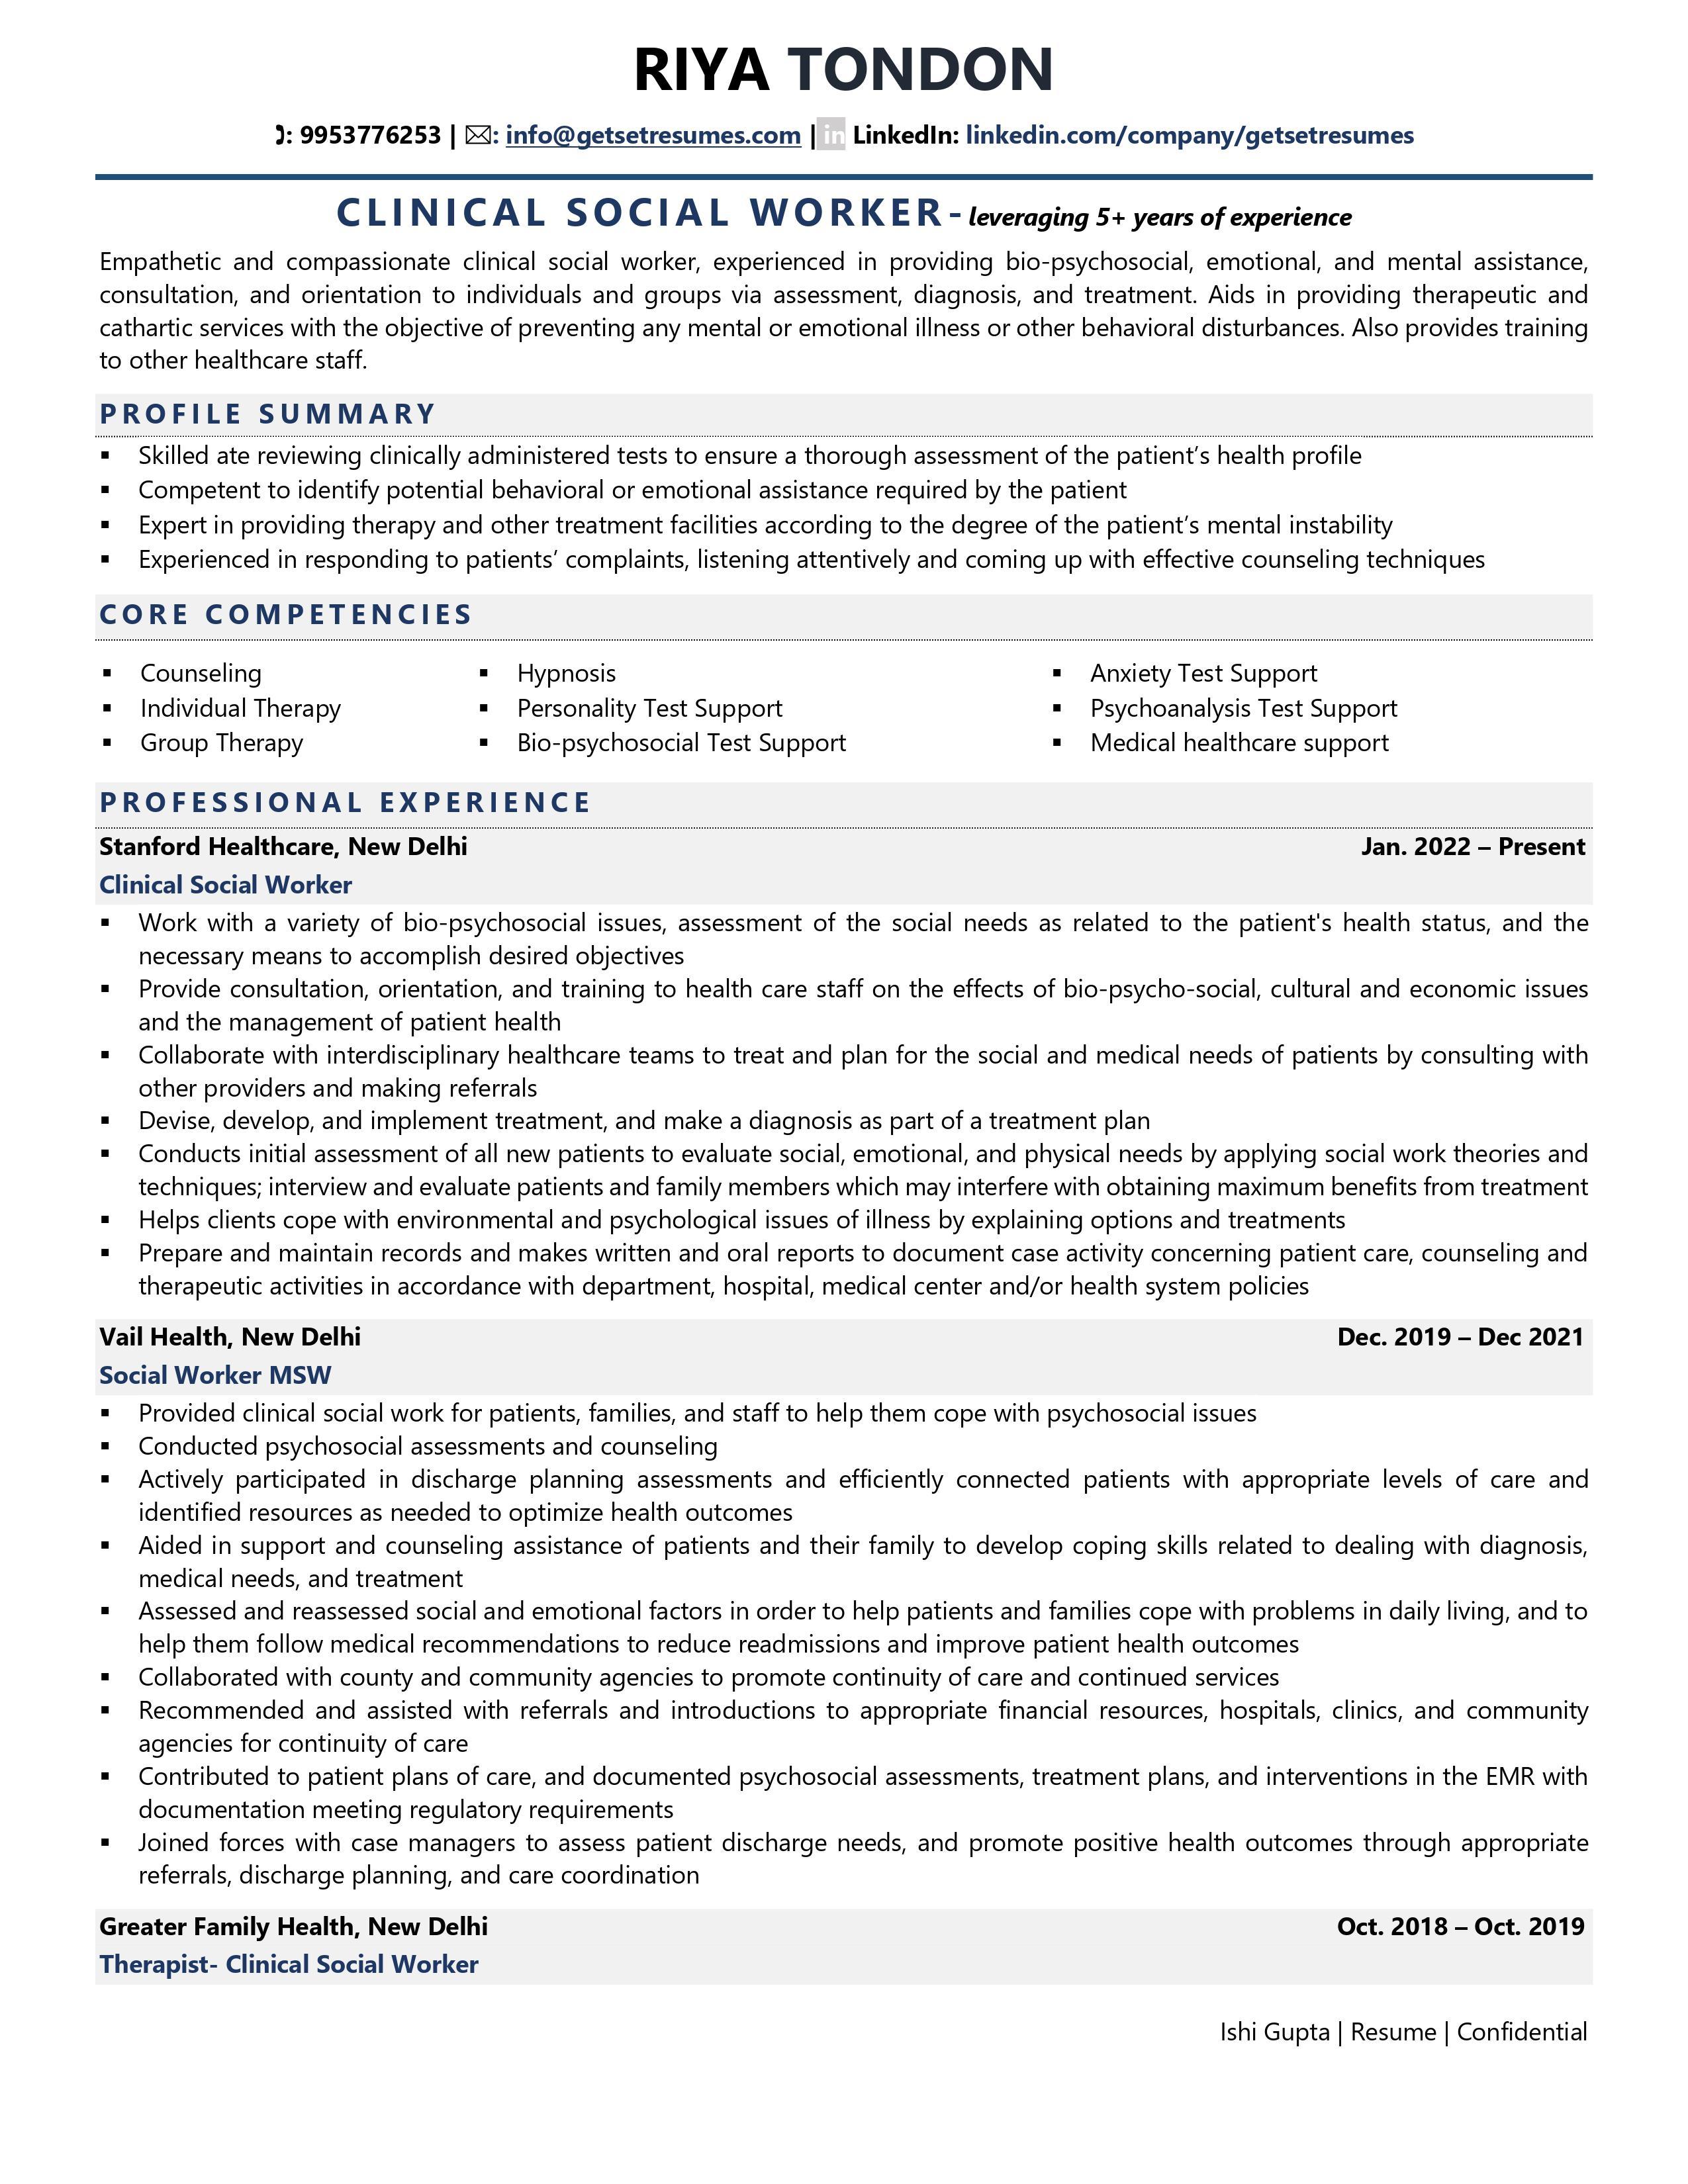 Clinical Social Worker Resume Examples Template (with job winning tips)